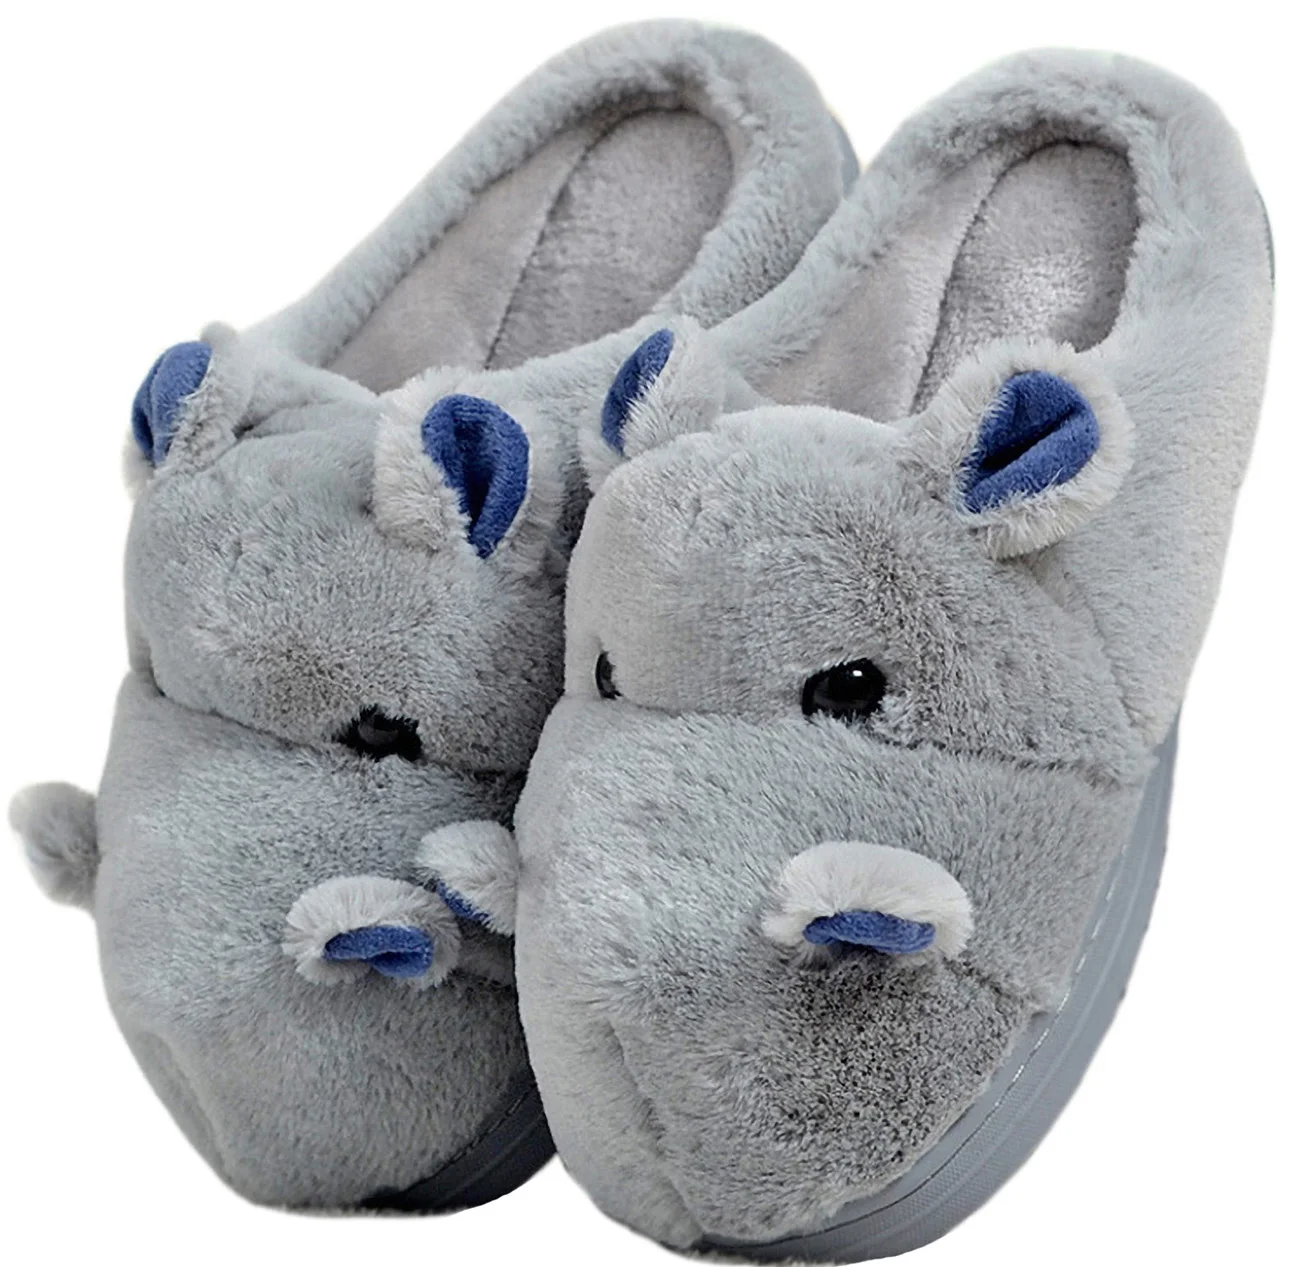 Unisex Fuzzy Fluffy furry Hippo Slippers shoes for women men winter warm Fashion cozy animal hippopotamus slippers  Home shoes